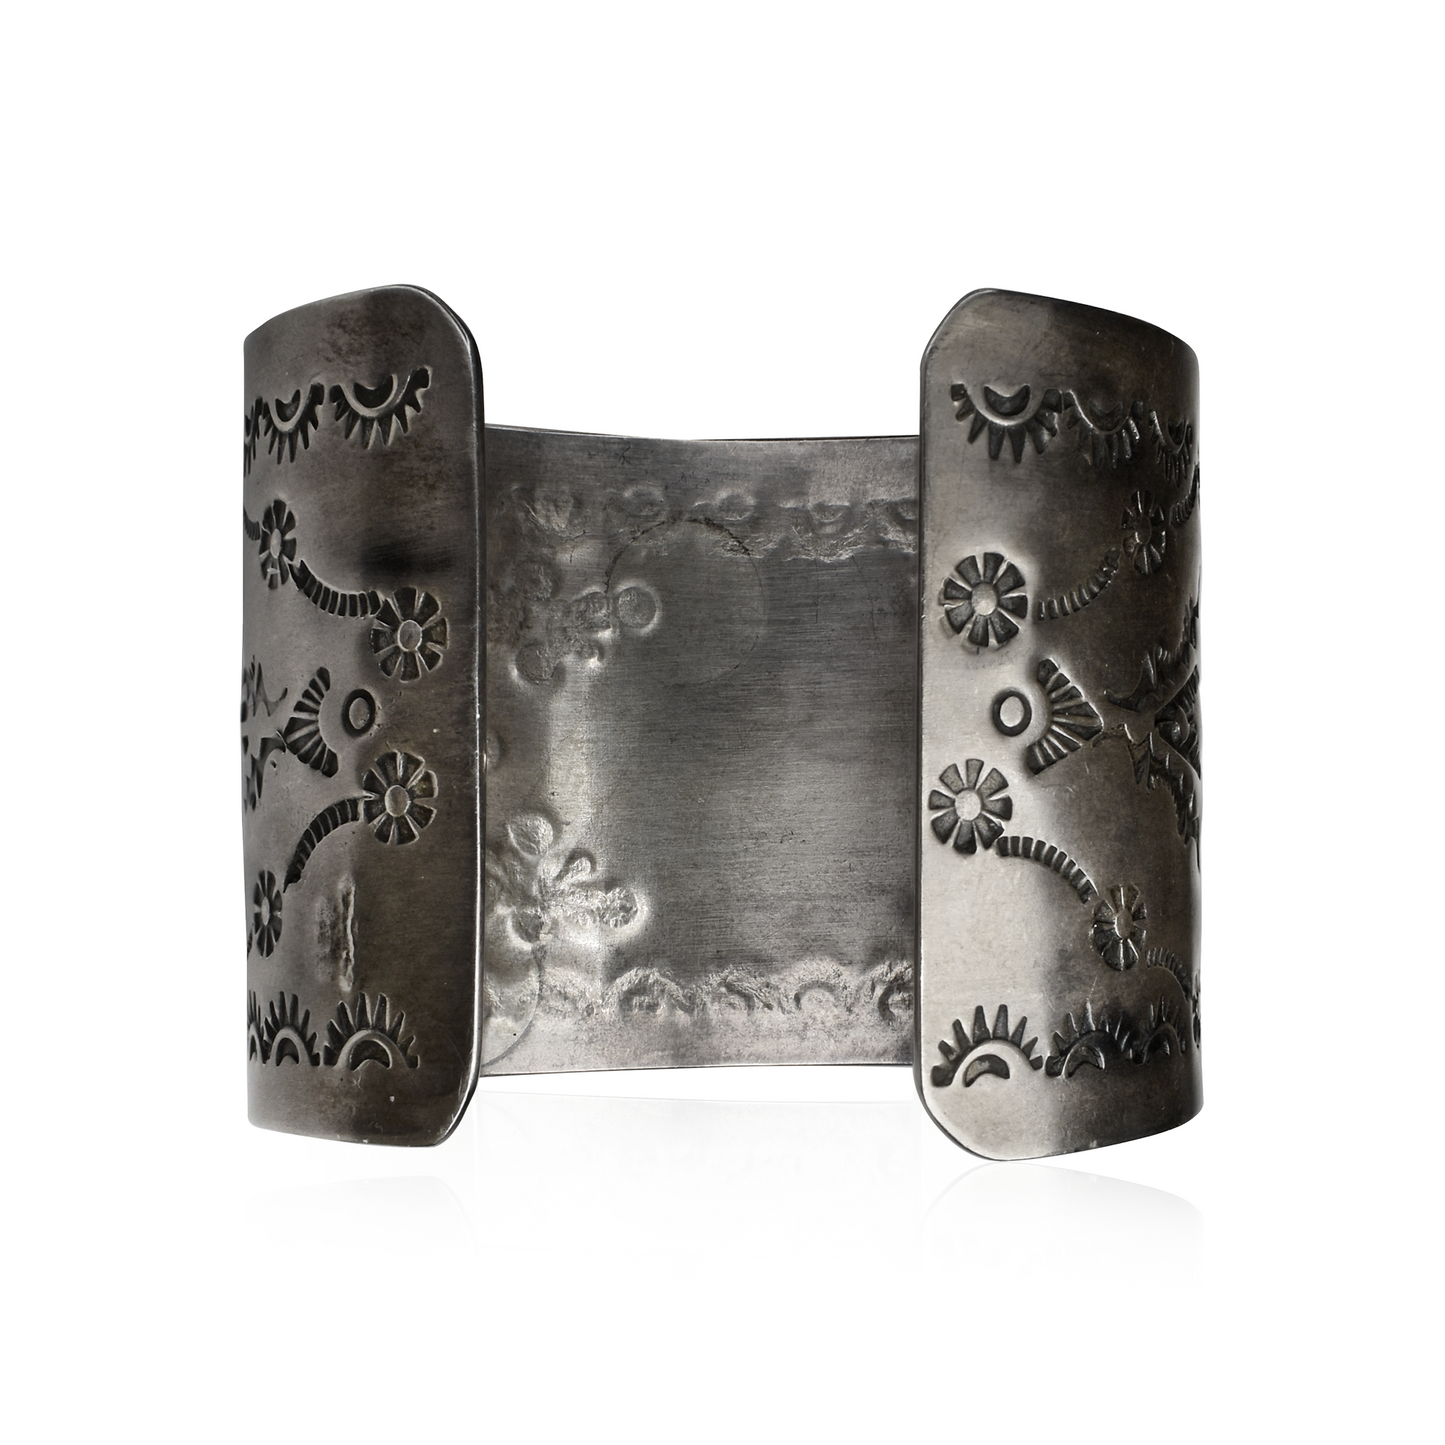 Hand-Stamped Mexican Silver Cuff with Concho by Rocki Gorman